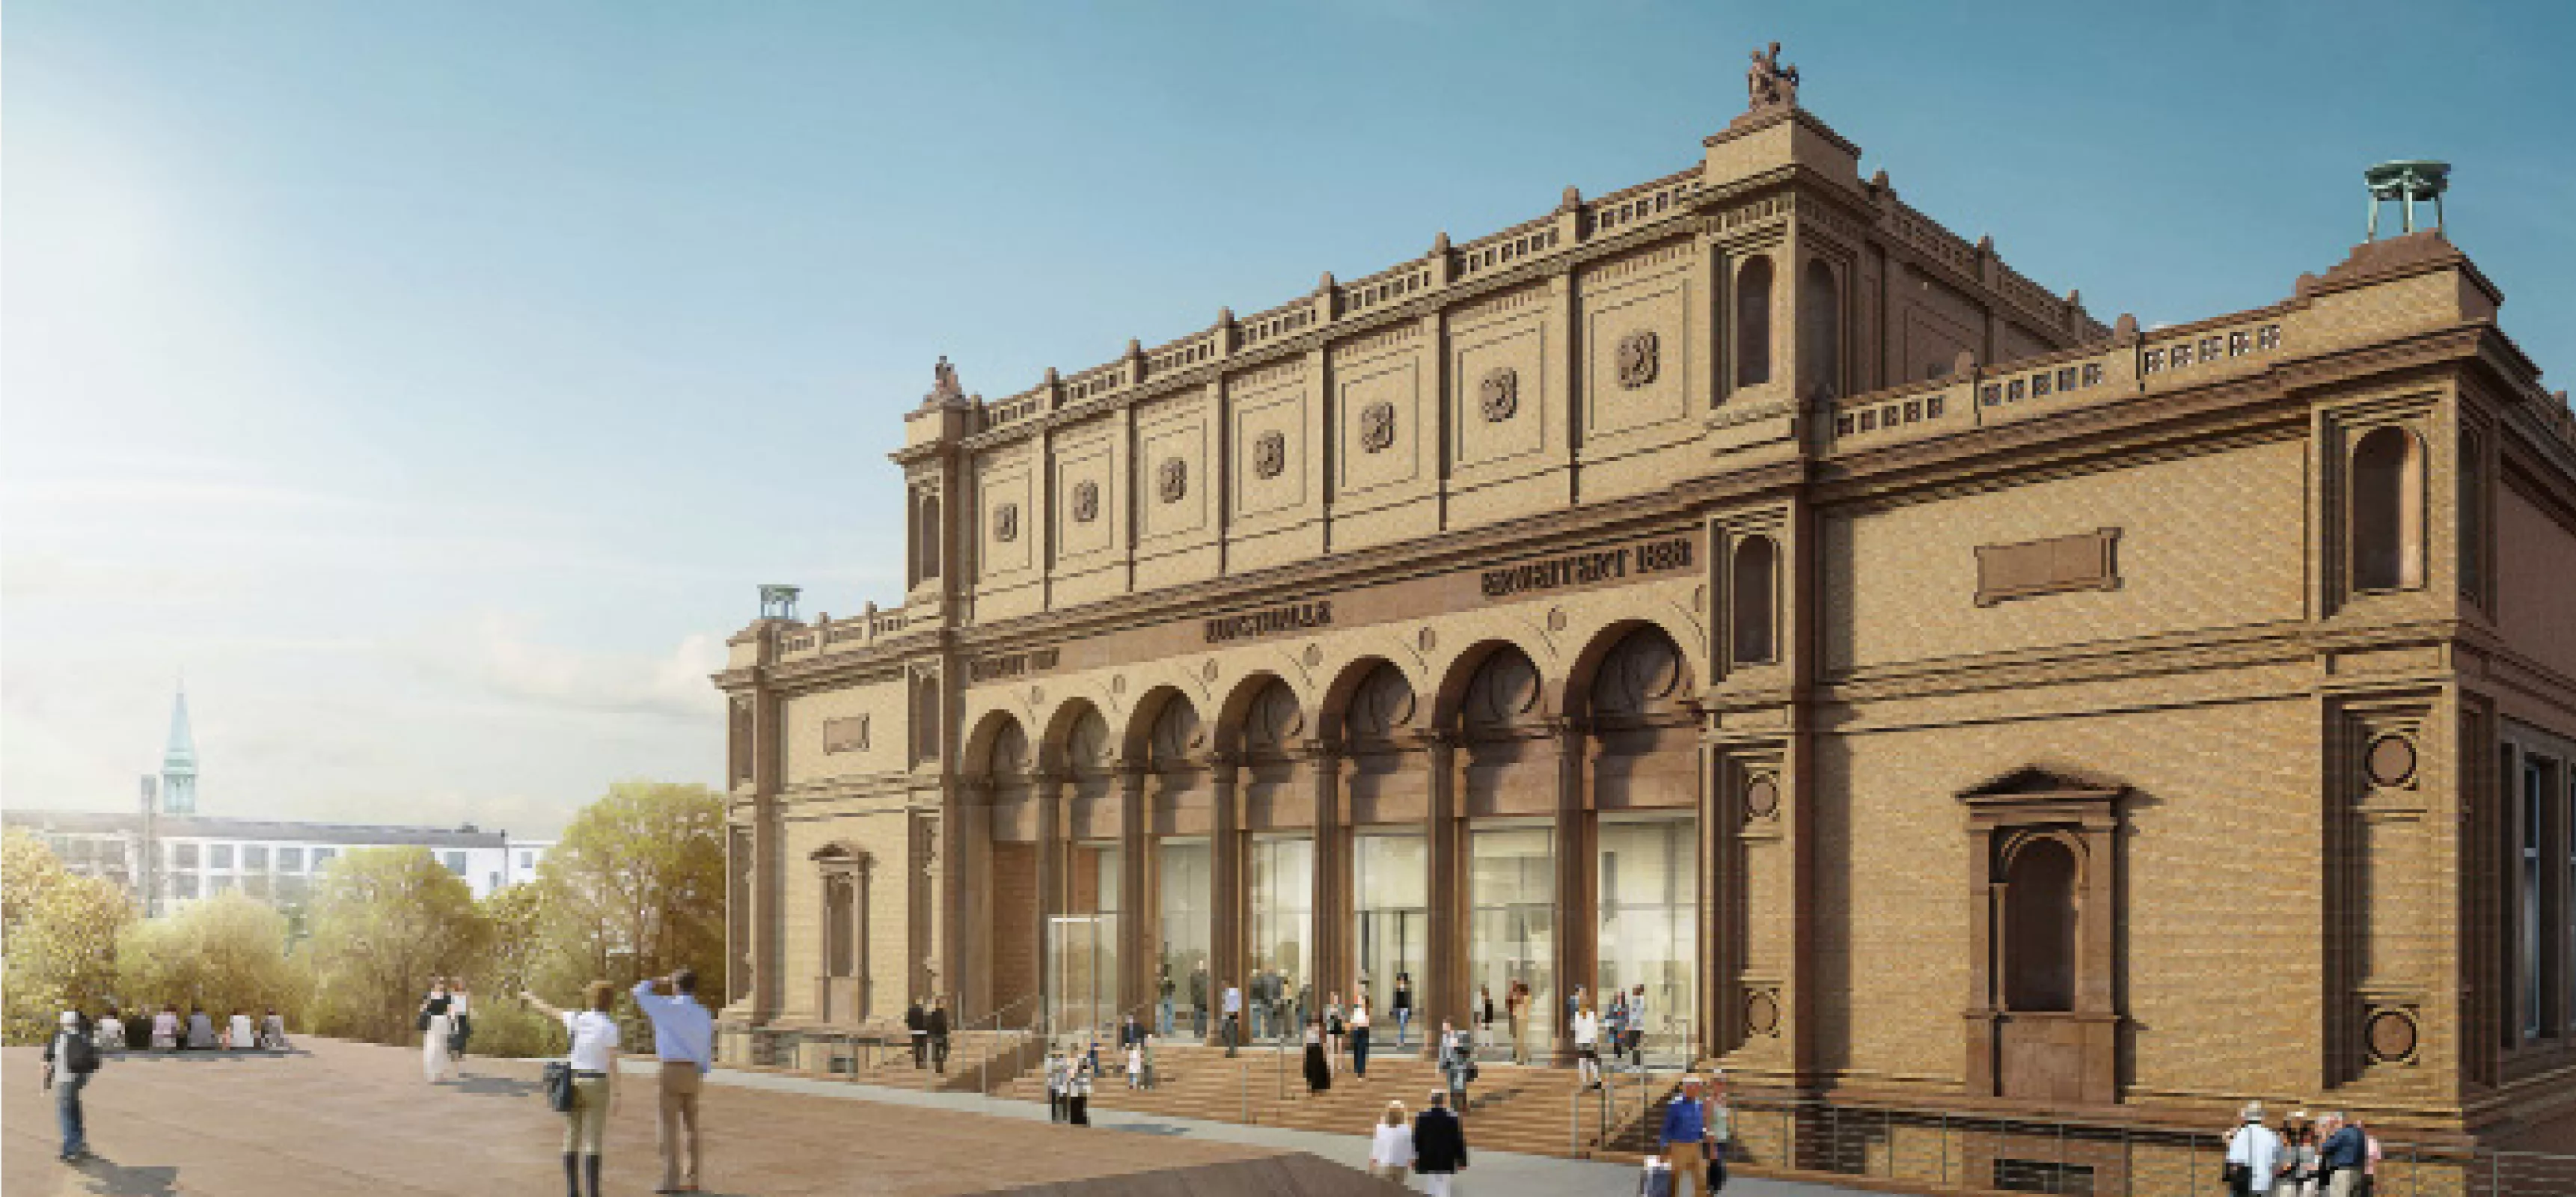 Hamburg Kunsthalle in Germany, Europe | Museums - Rated 3.7